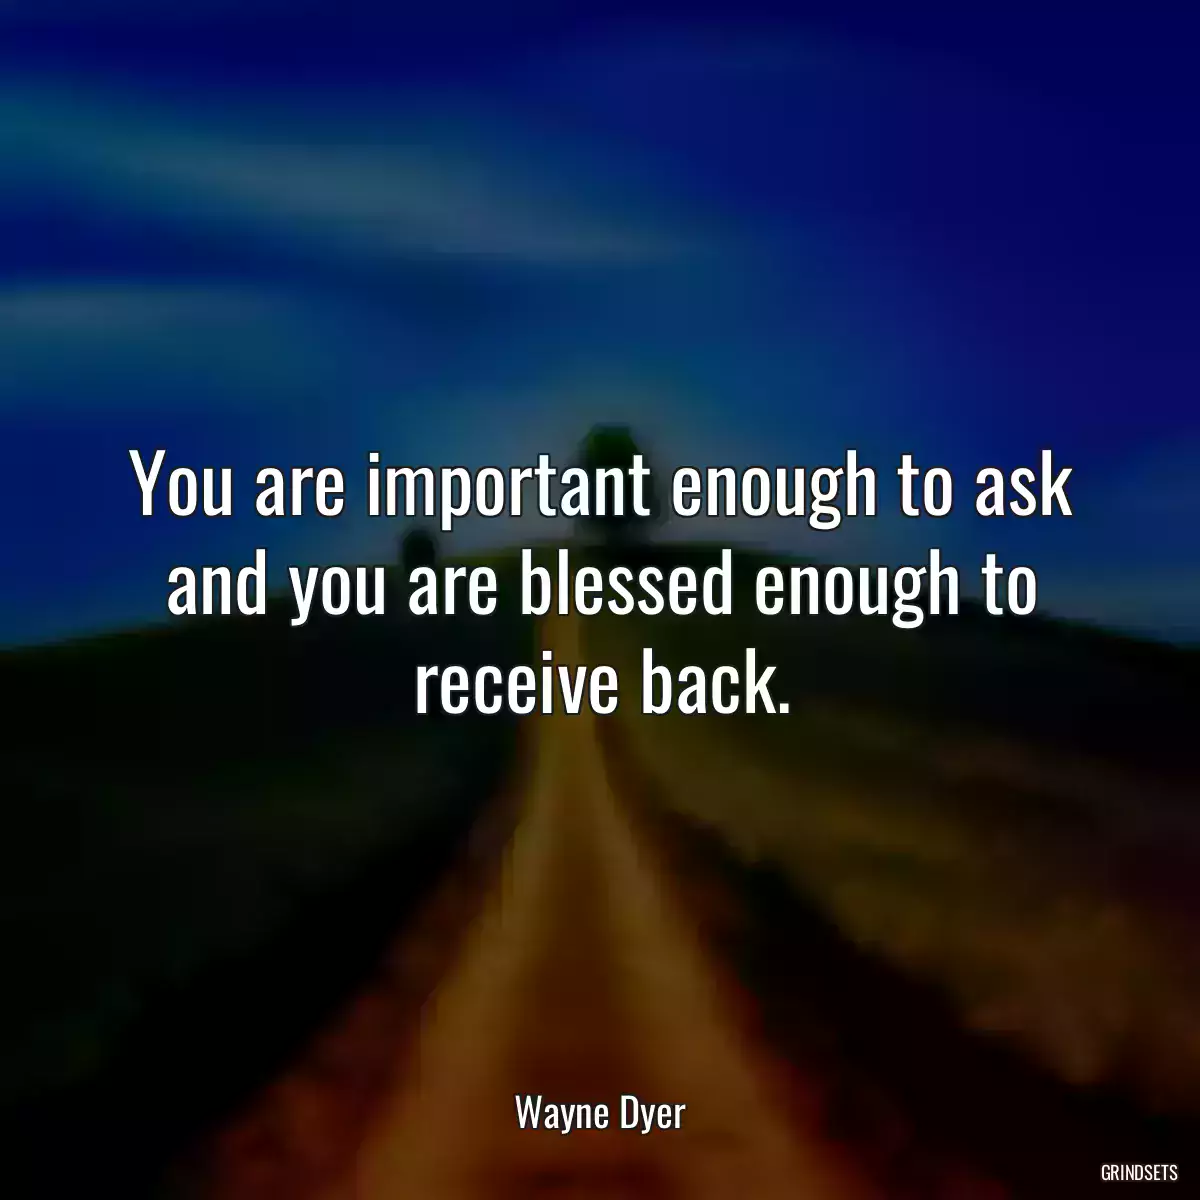 You are important enough to ask and you are blessed enough to receive back.